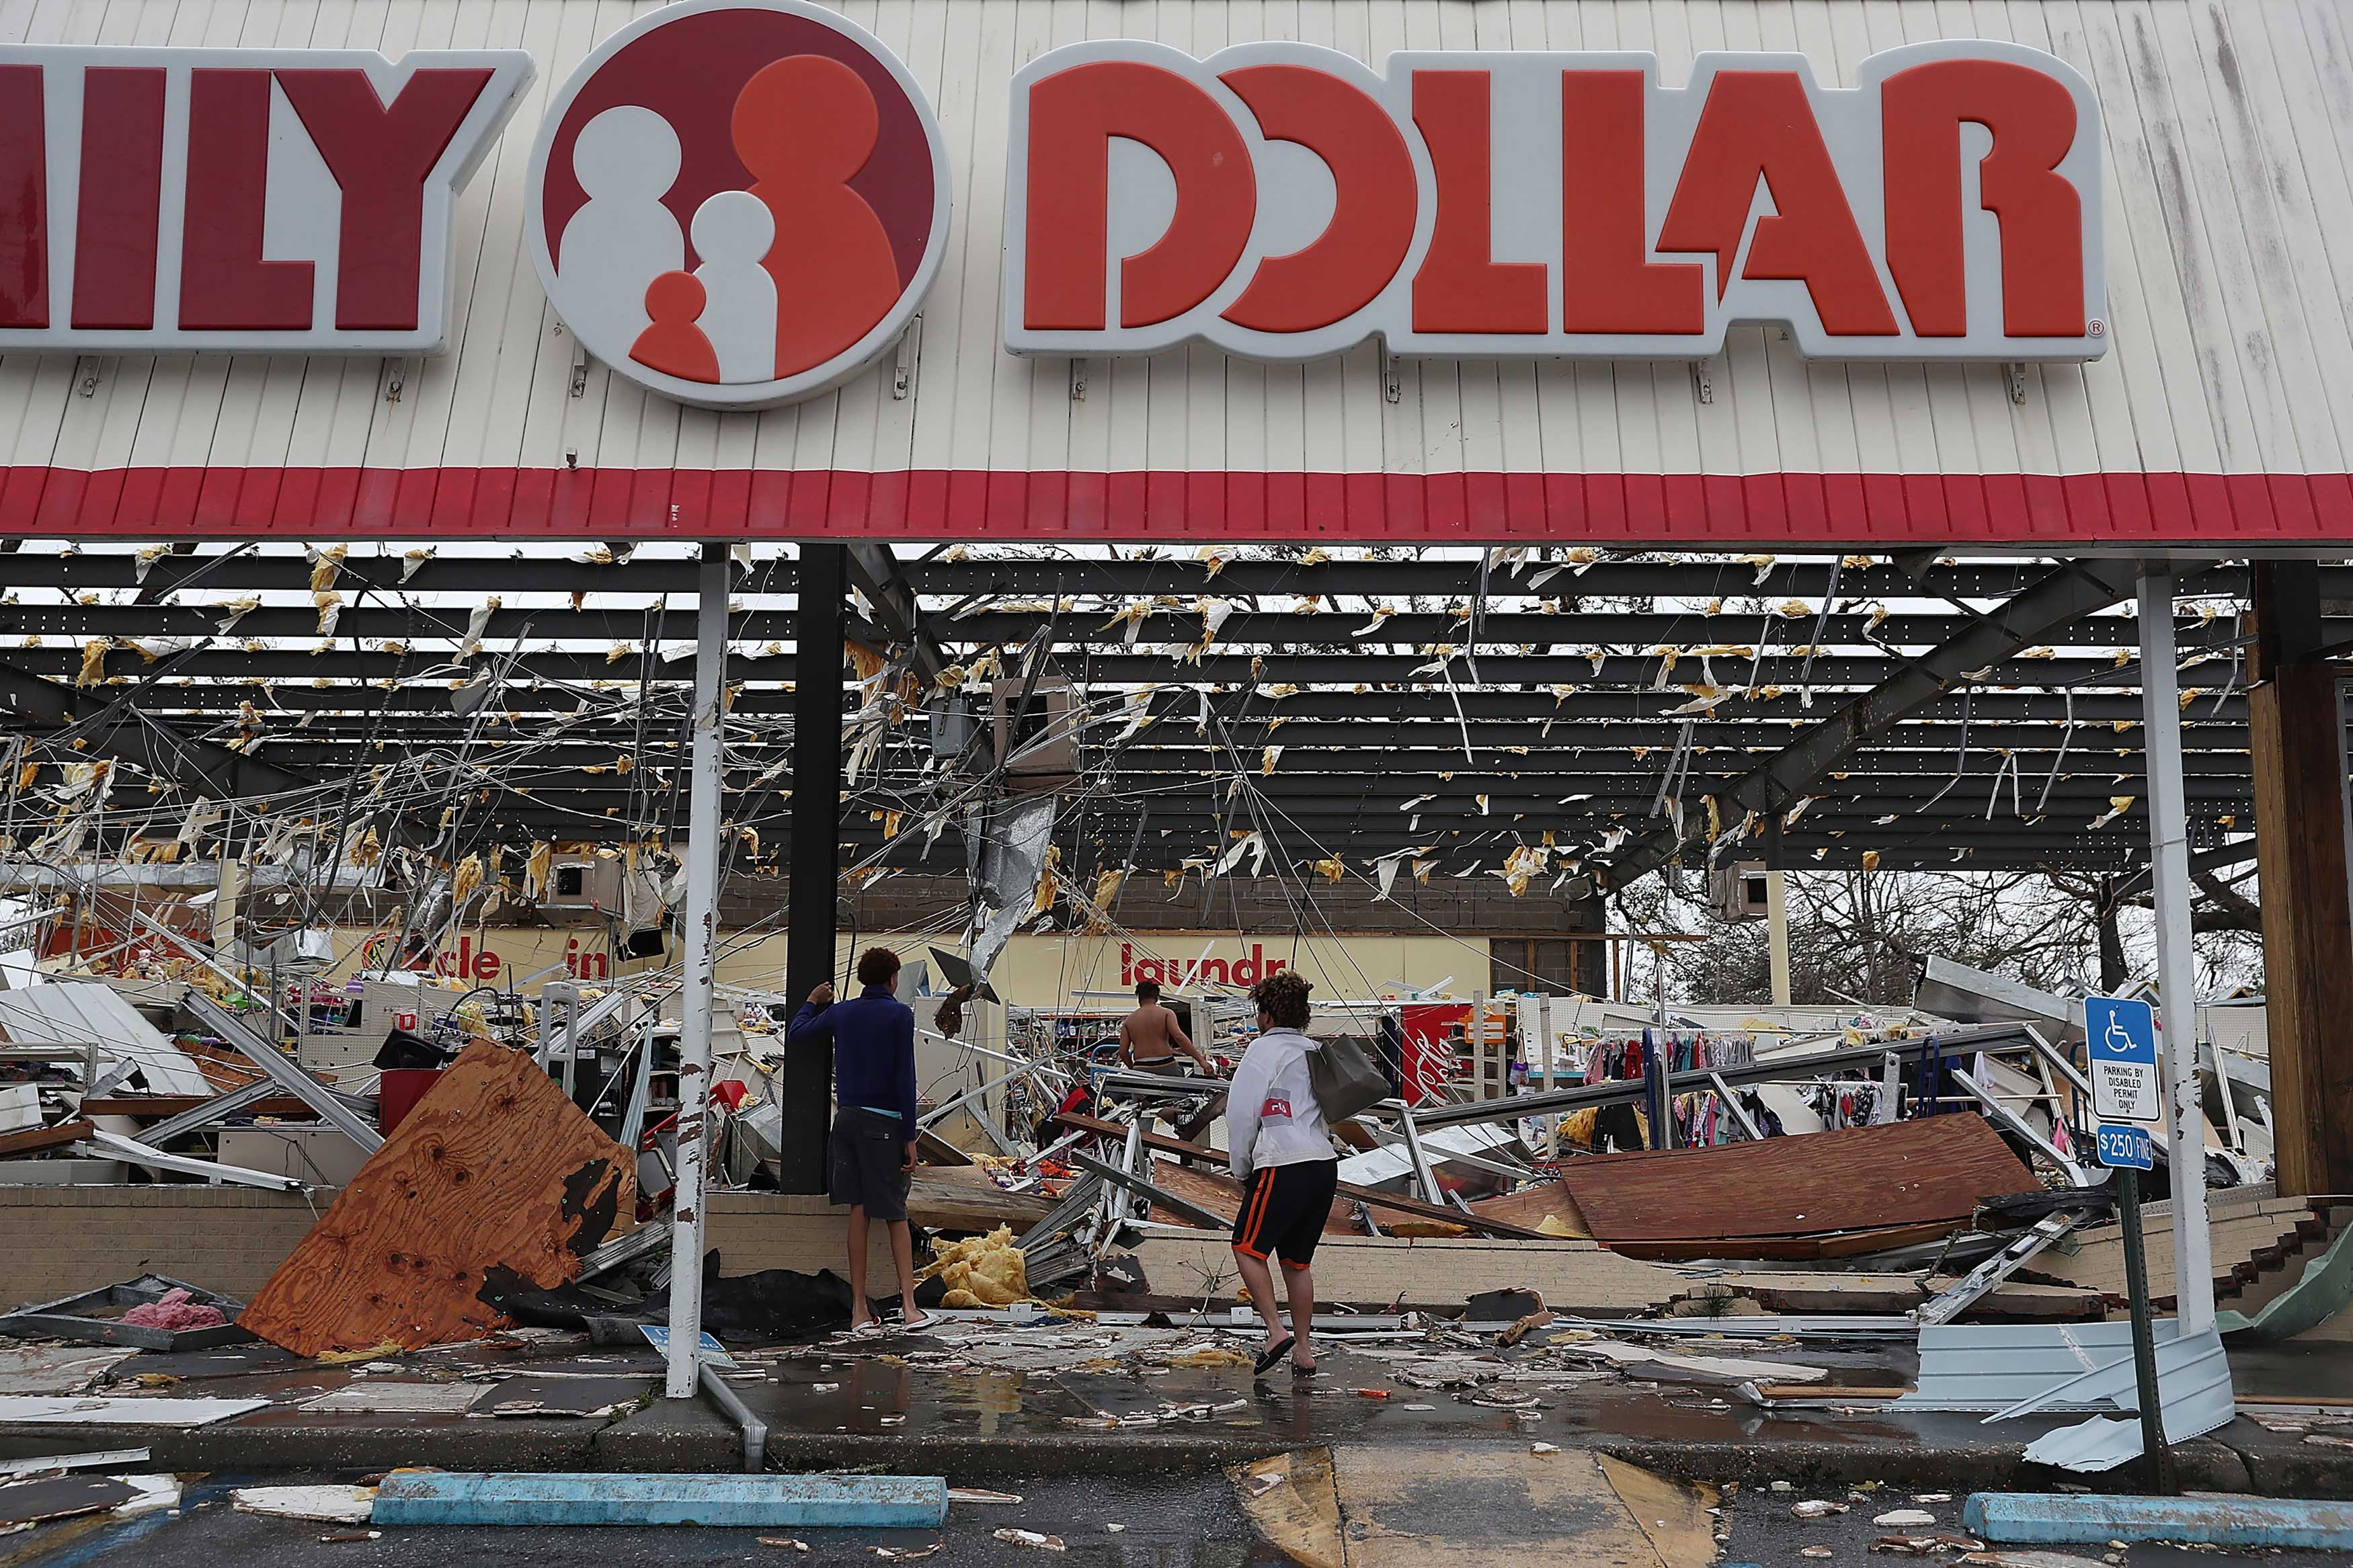 People look on at a damaged store after Hurricane Michael passed through on Oct. 10, 2018 in Panama City, Fla. (Joe Raedle—Getty Images)